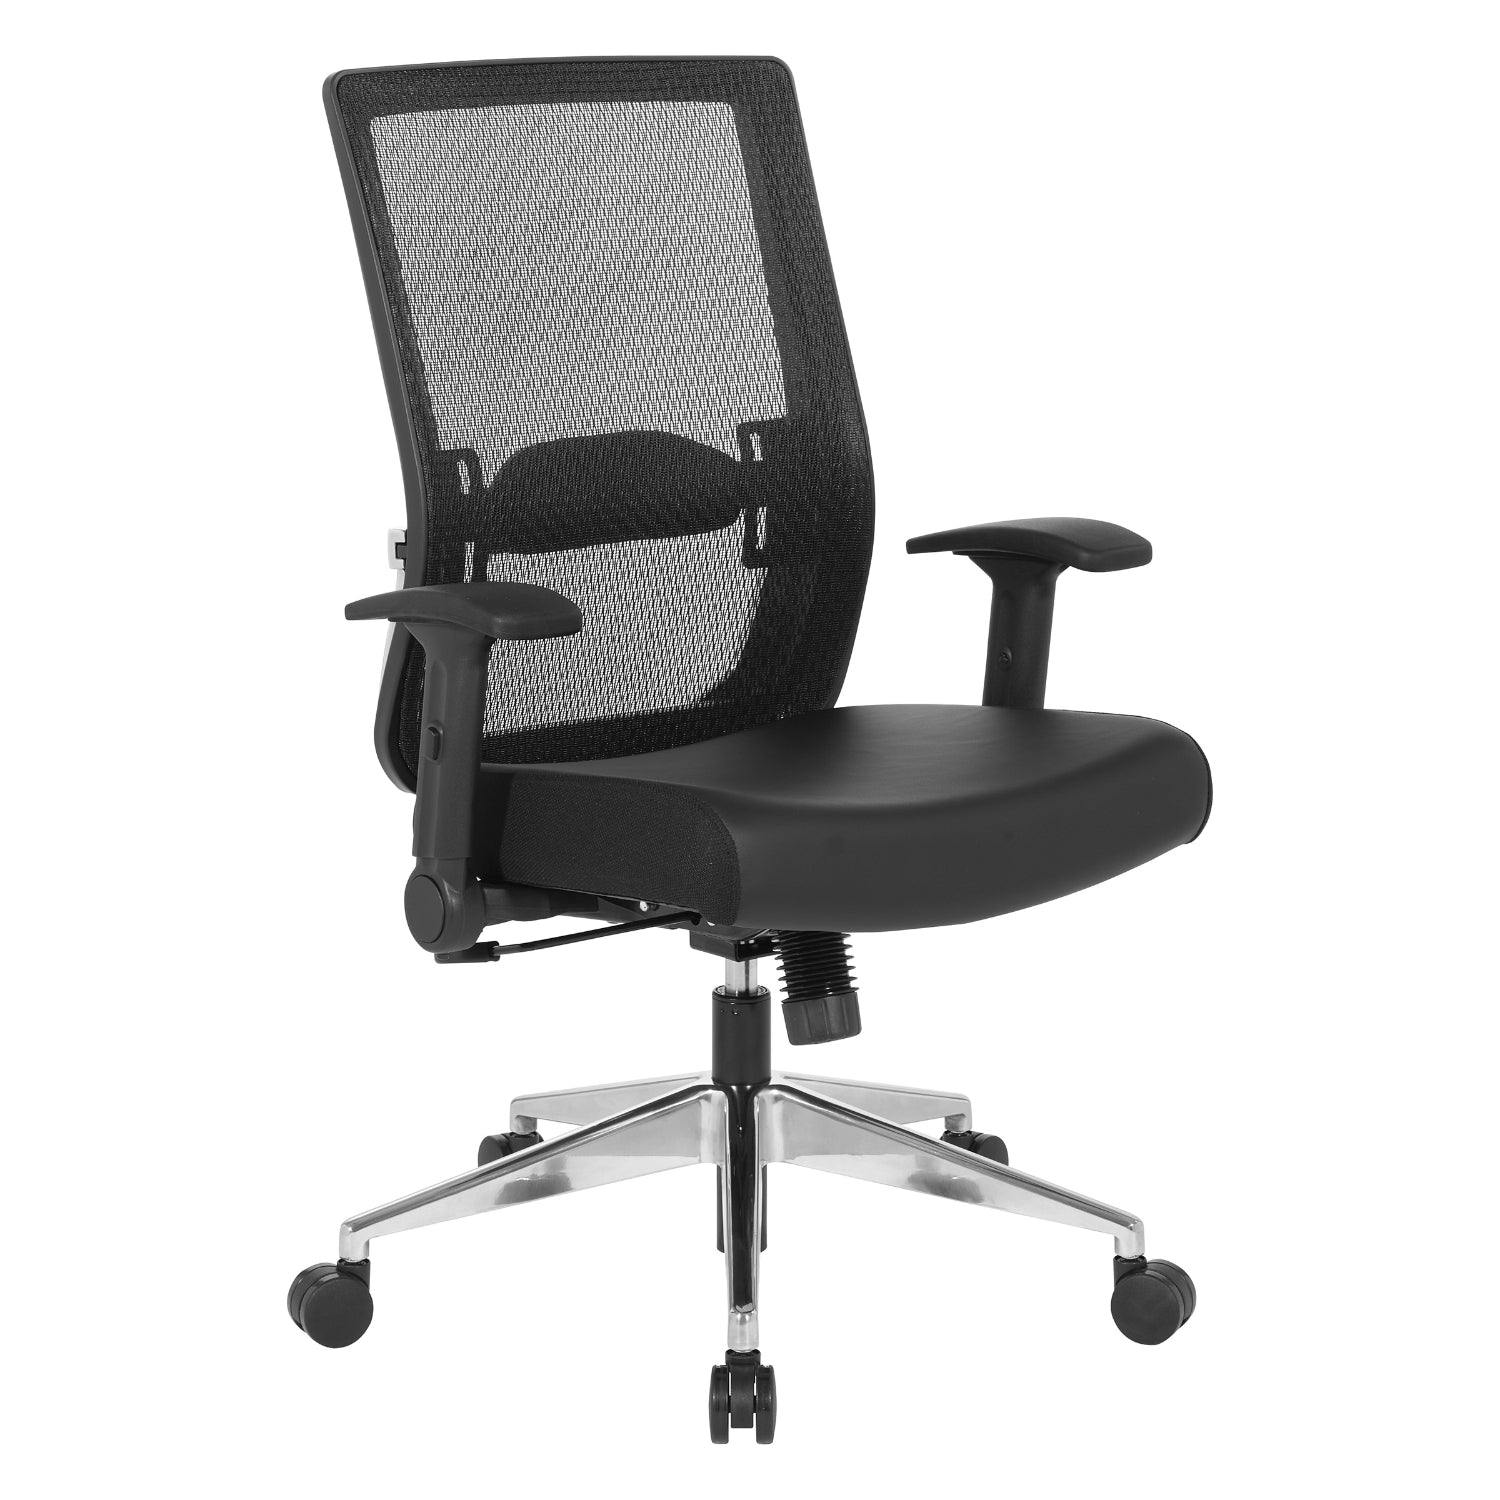 Black Matrix Back Manager's Chair with Black Bonded Leather Seat, Height Adjustable Lumbar Support, Adjustable Flip Arms and Polished Aluminum Back Support and Base